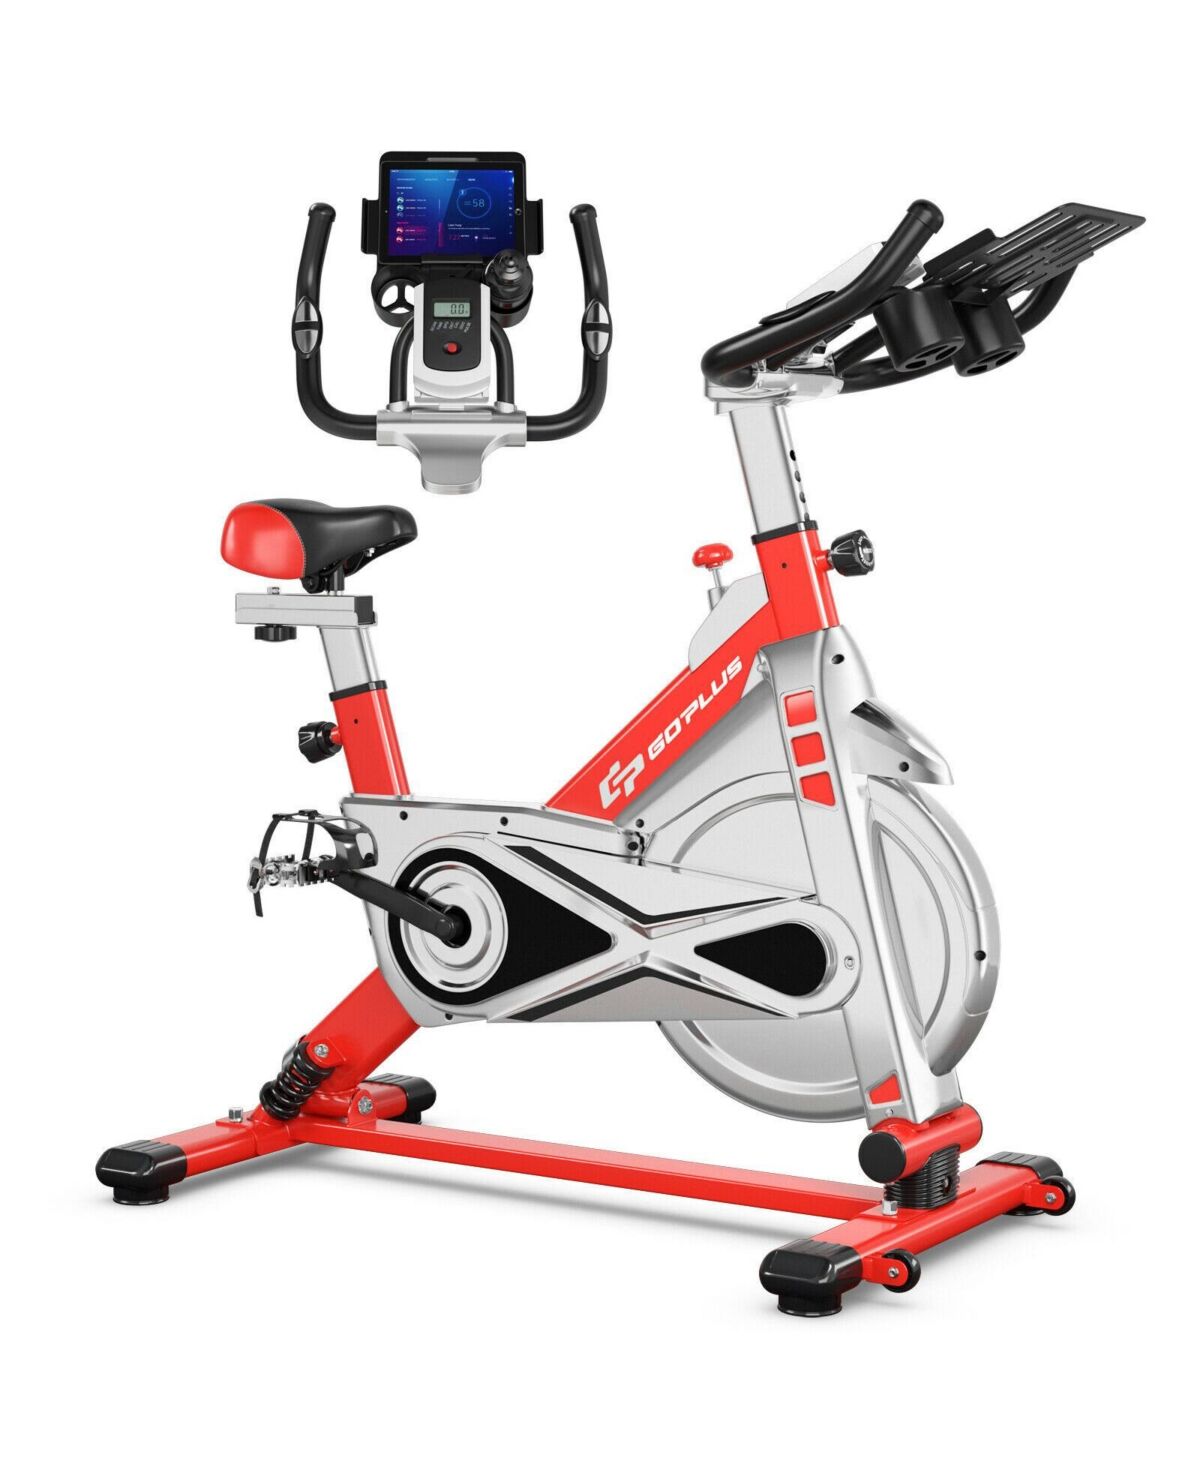 Costway Indoor Stationary Exercise Cycle Bike Bicycle Workout - Red